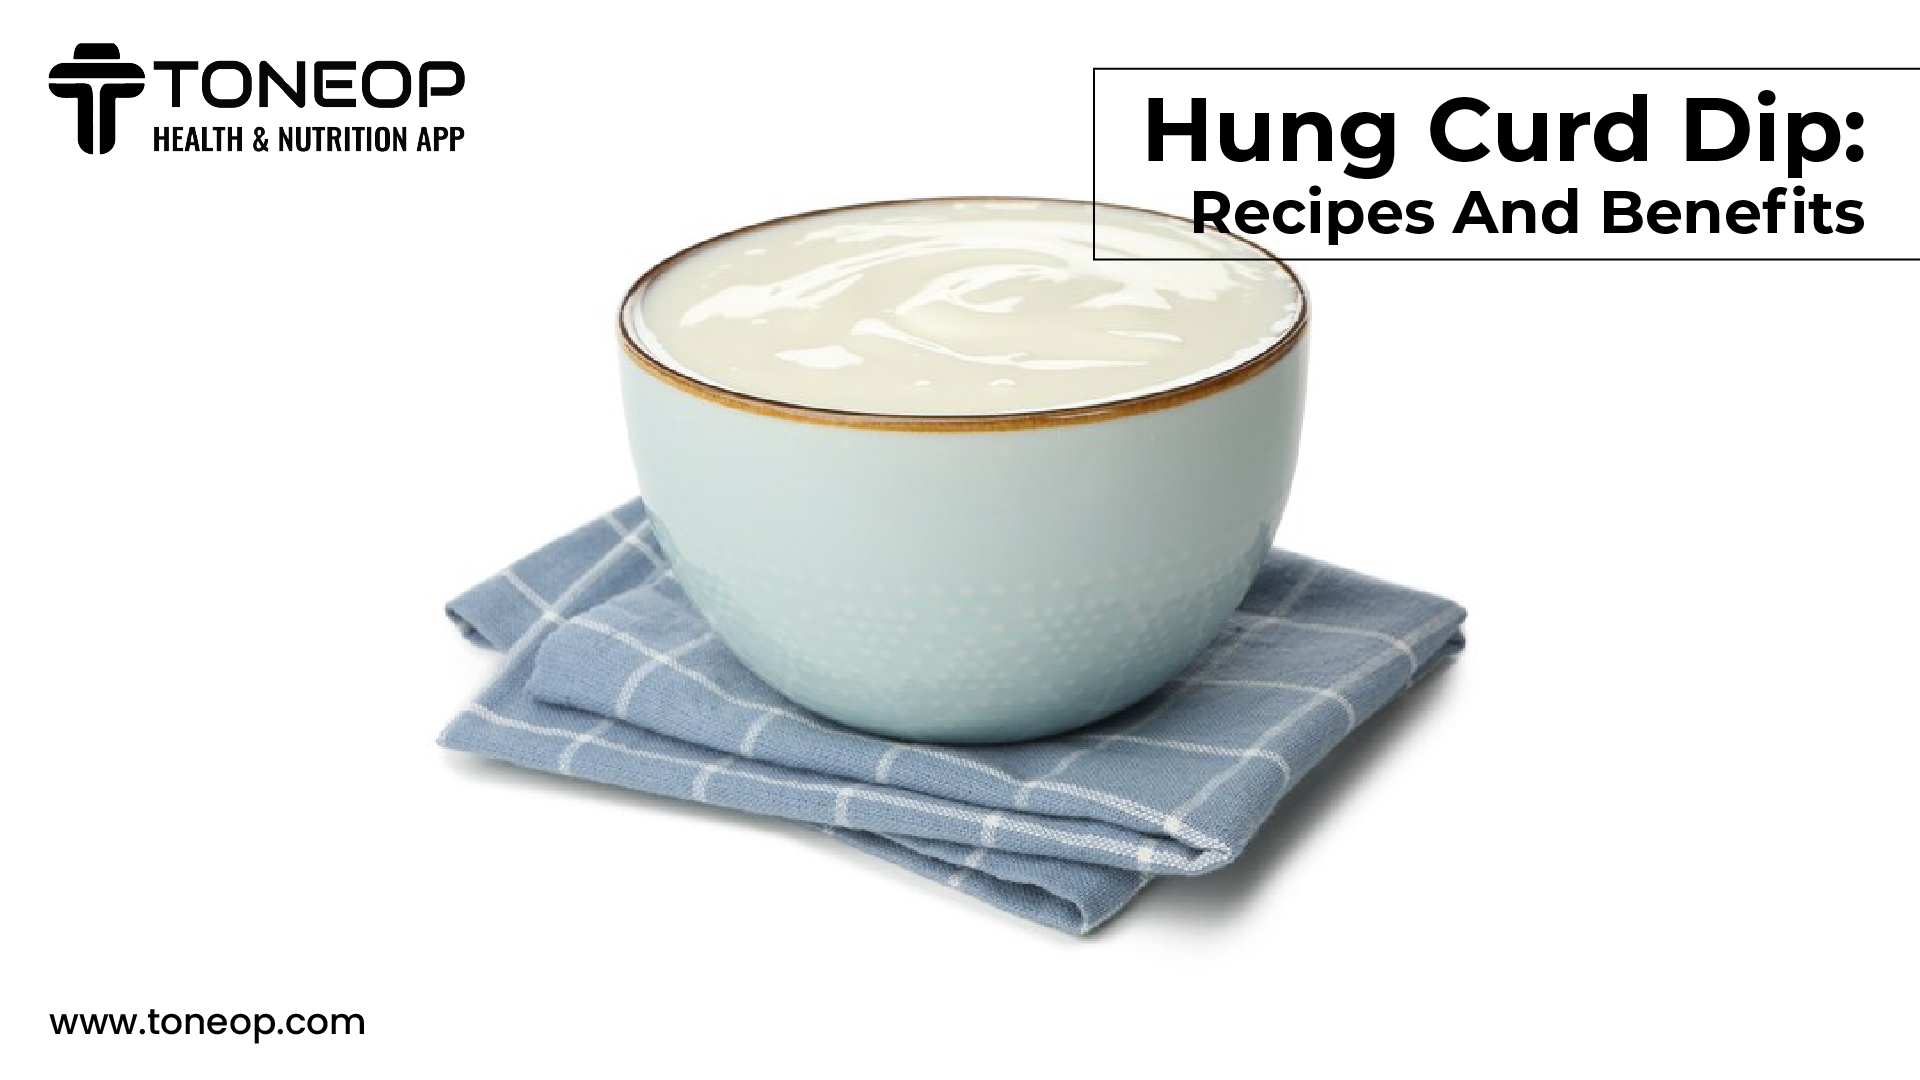 Hung Curd Dip: Recipes And Benefits